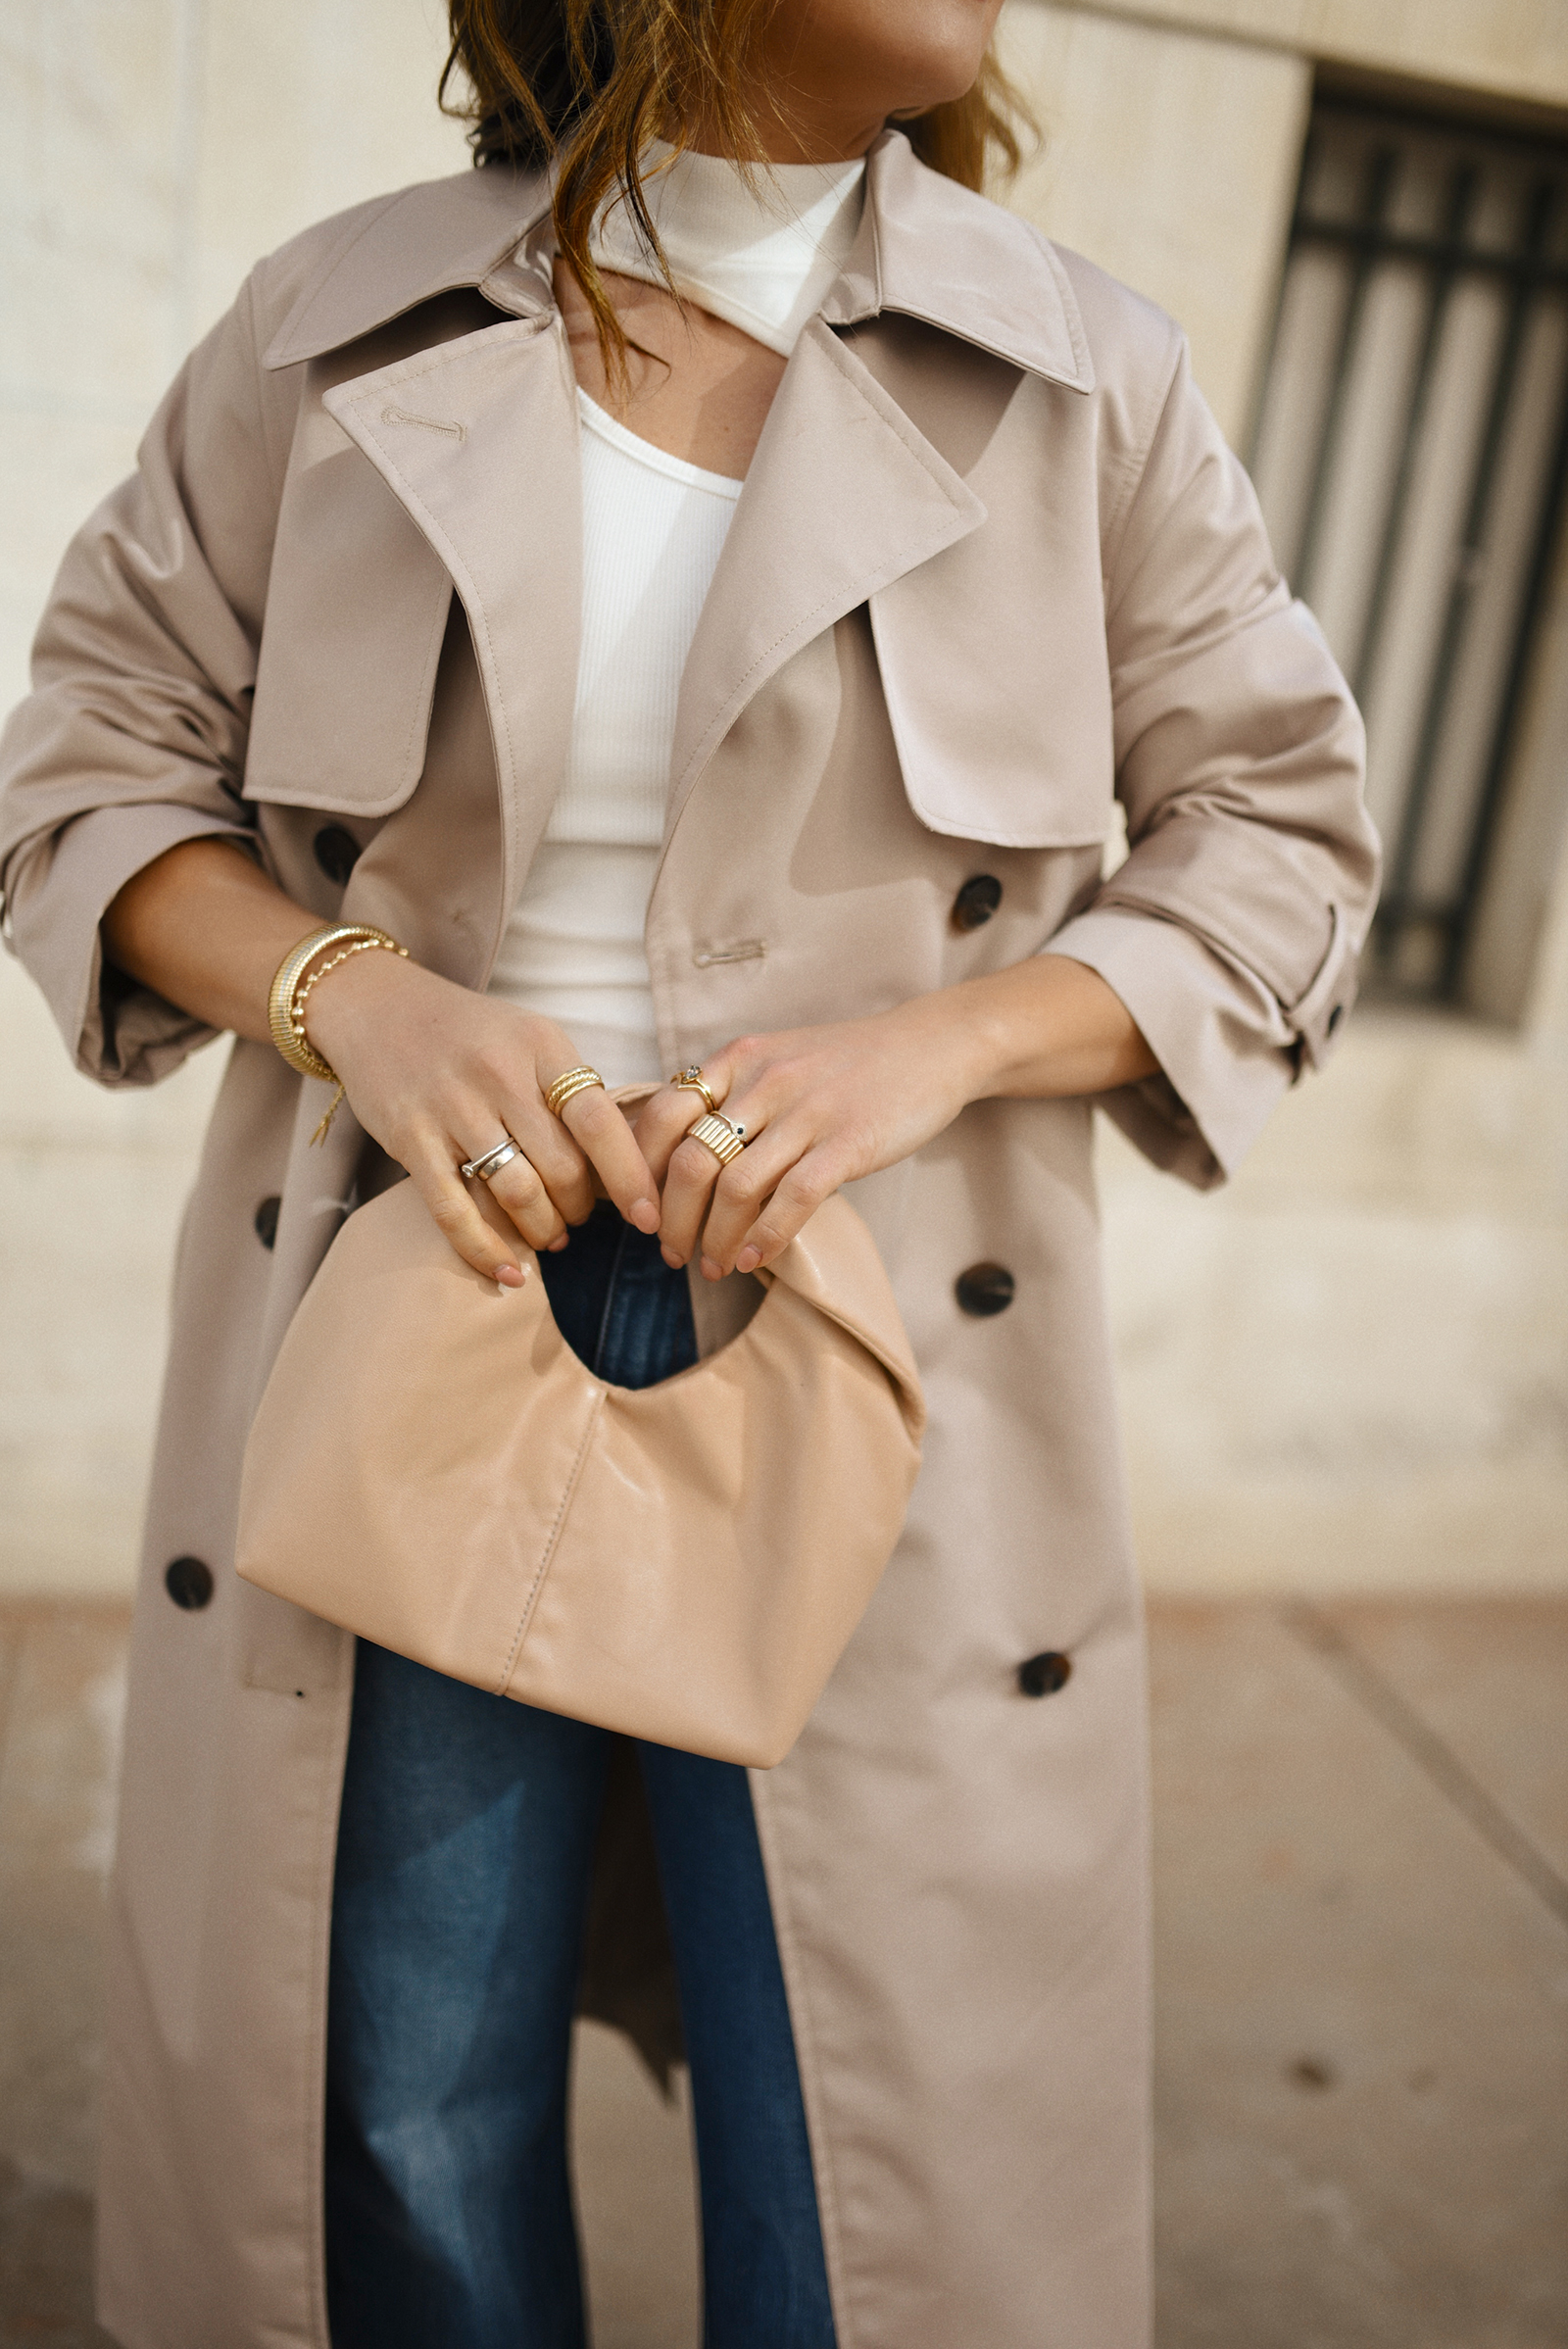 Carolina Hellal of CHIC TALK wearing a Hudson wide leg jeans and tank top, and a Target trench coat and crossbody bag